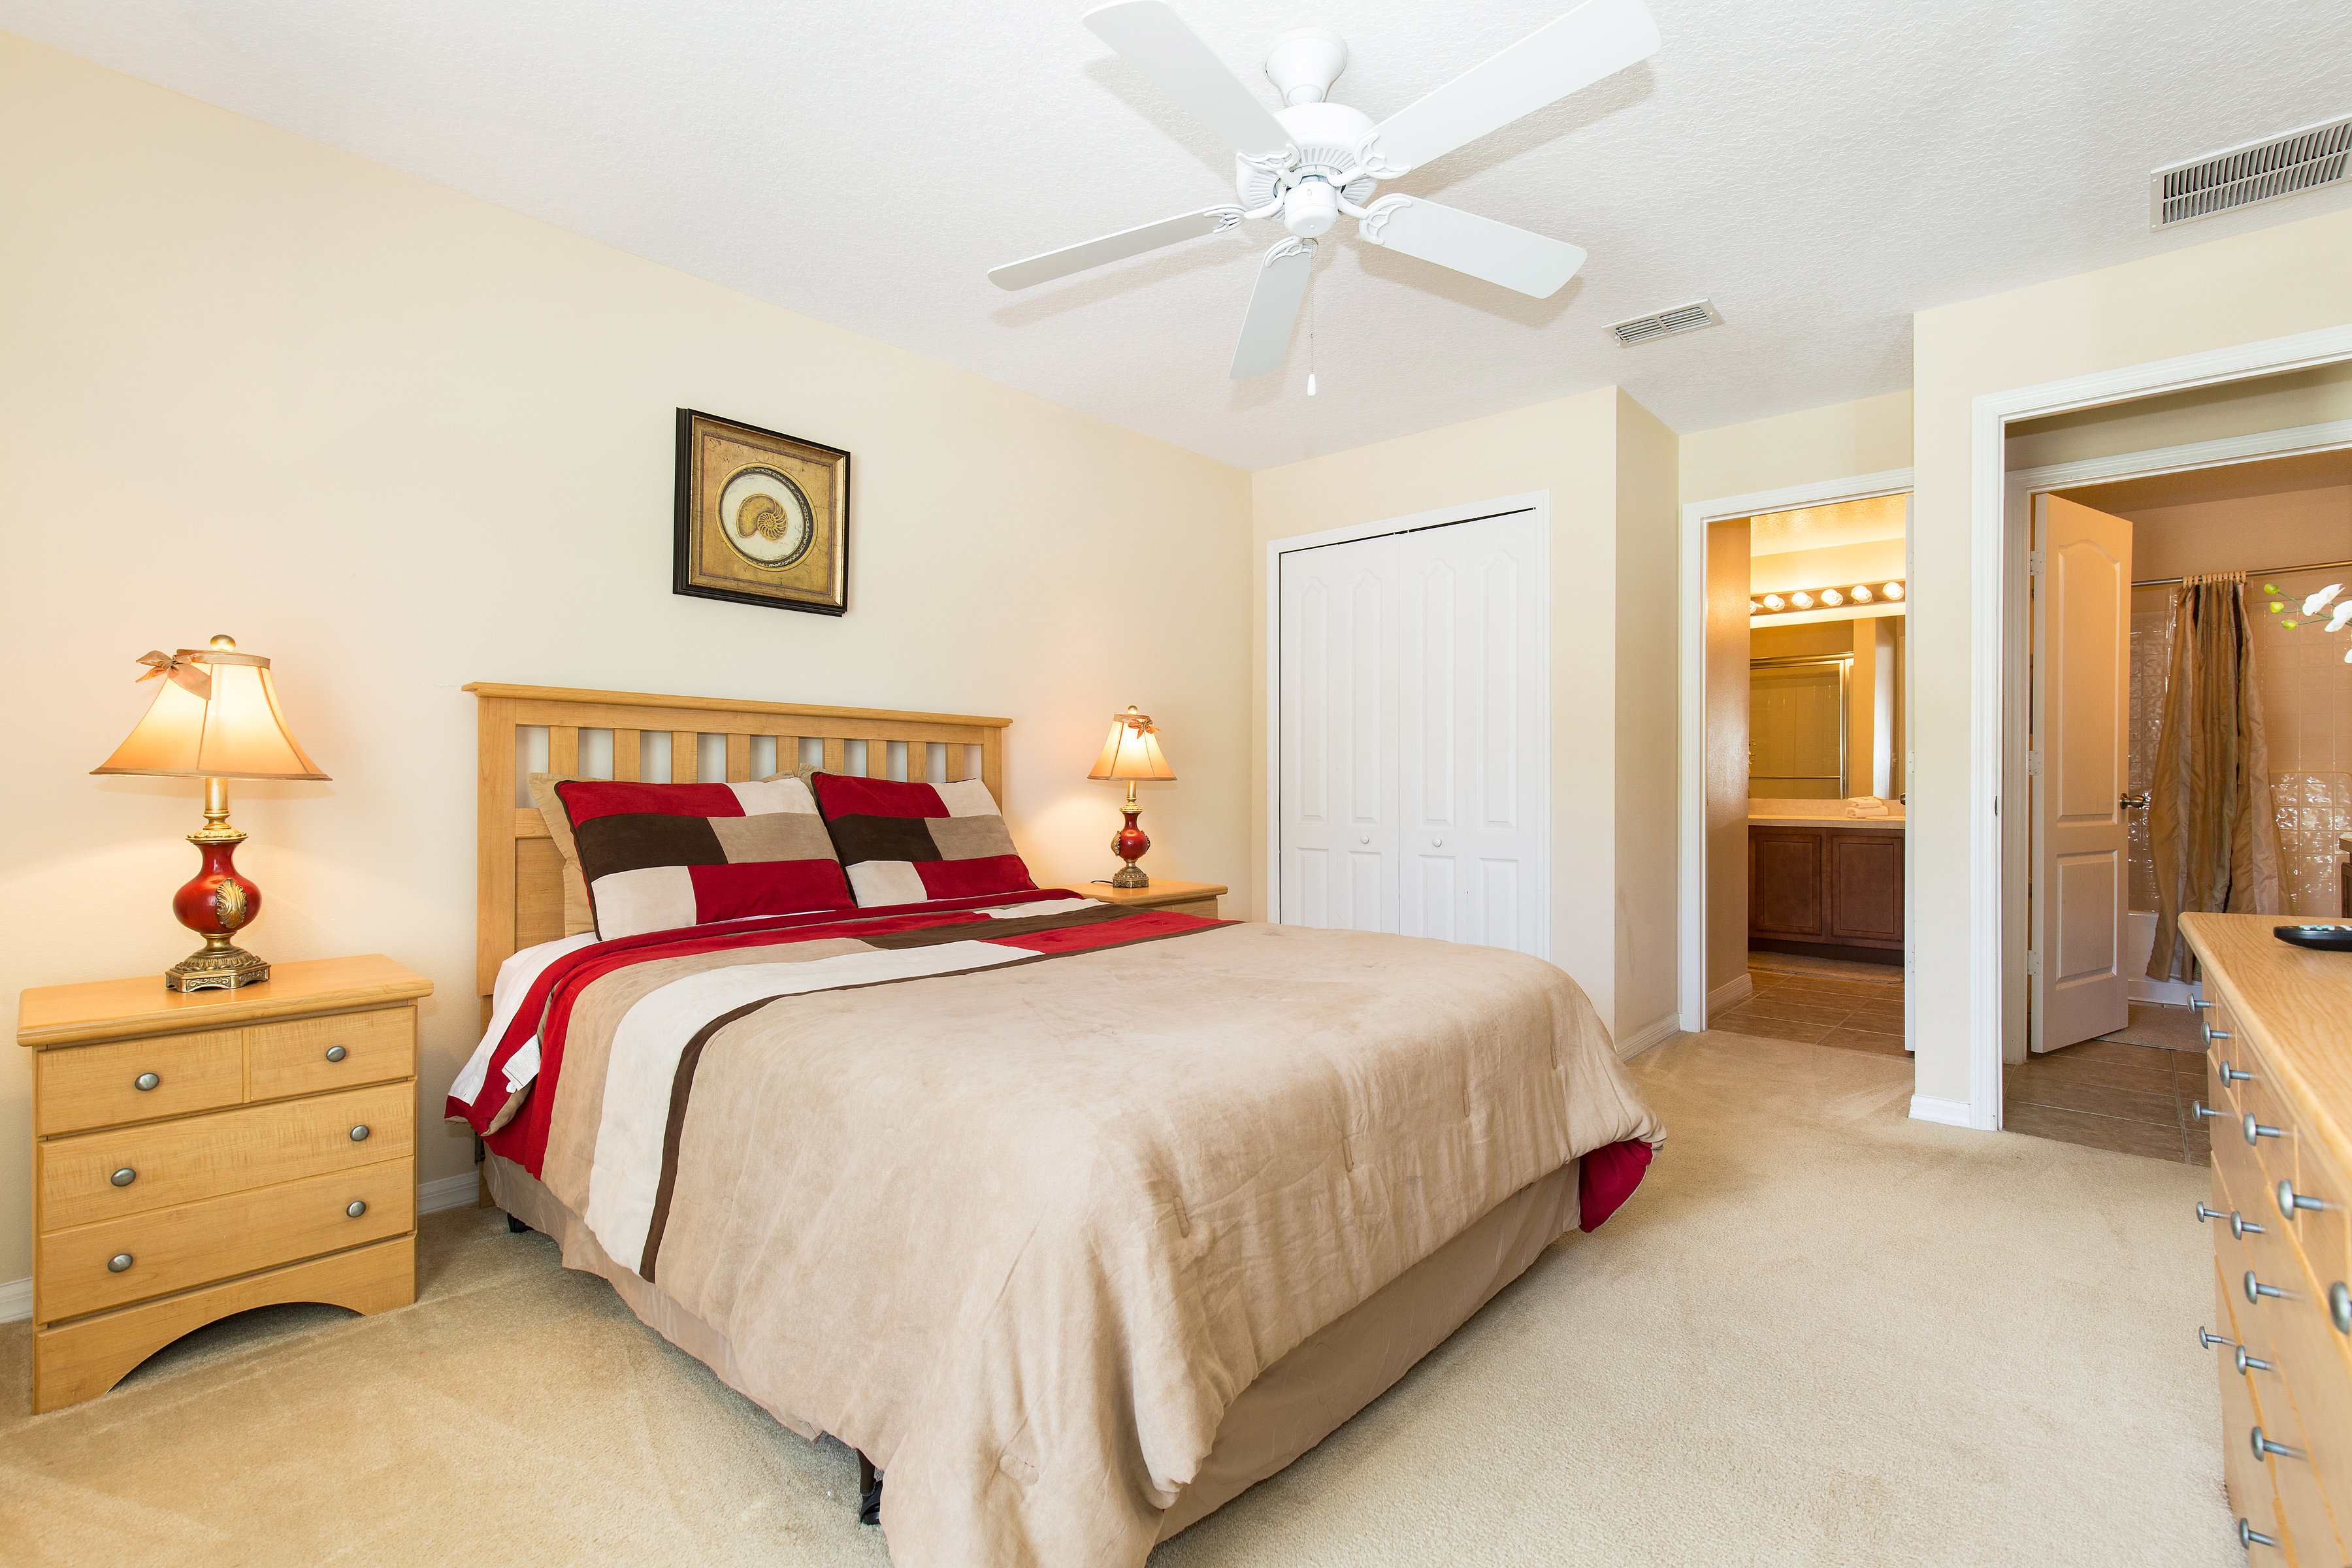 reserve at town center vacation rentals vacation rentals united states florida davenport vacation rentals united states florida davenport